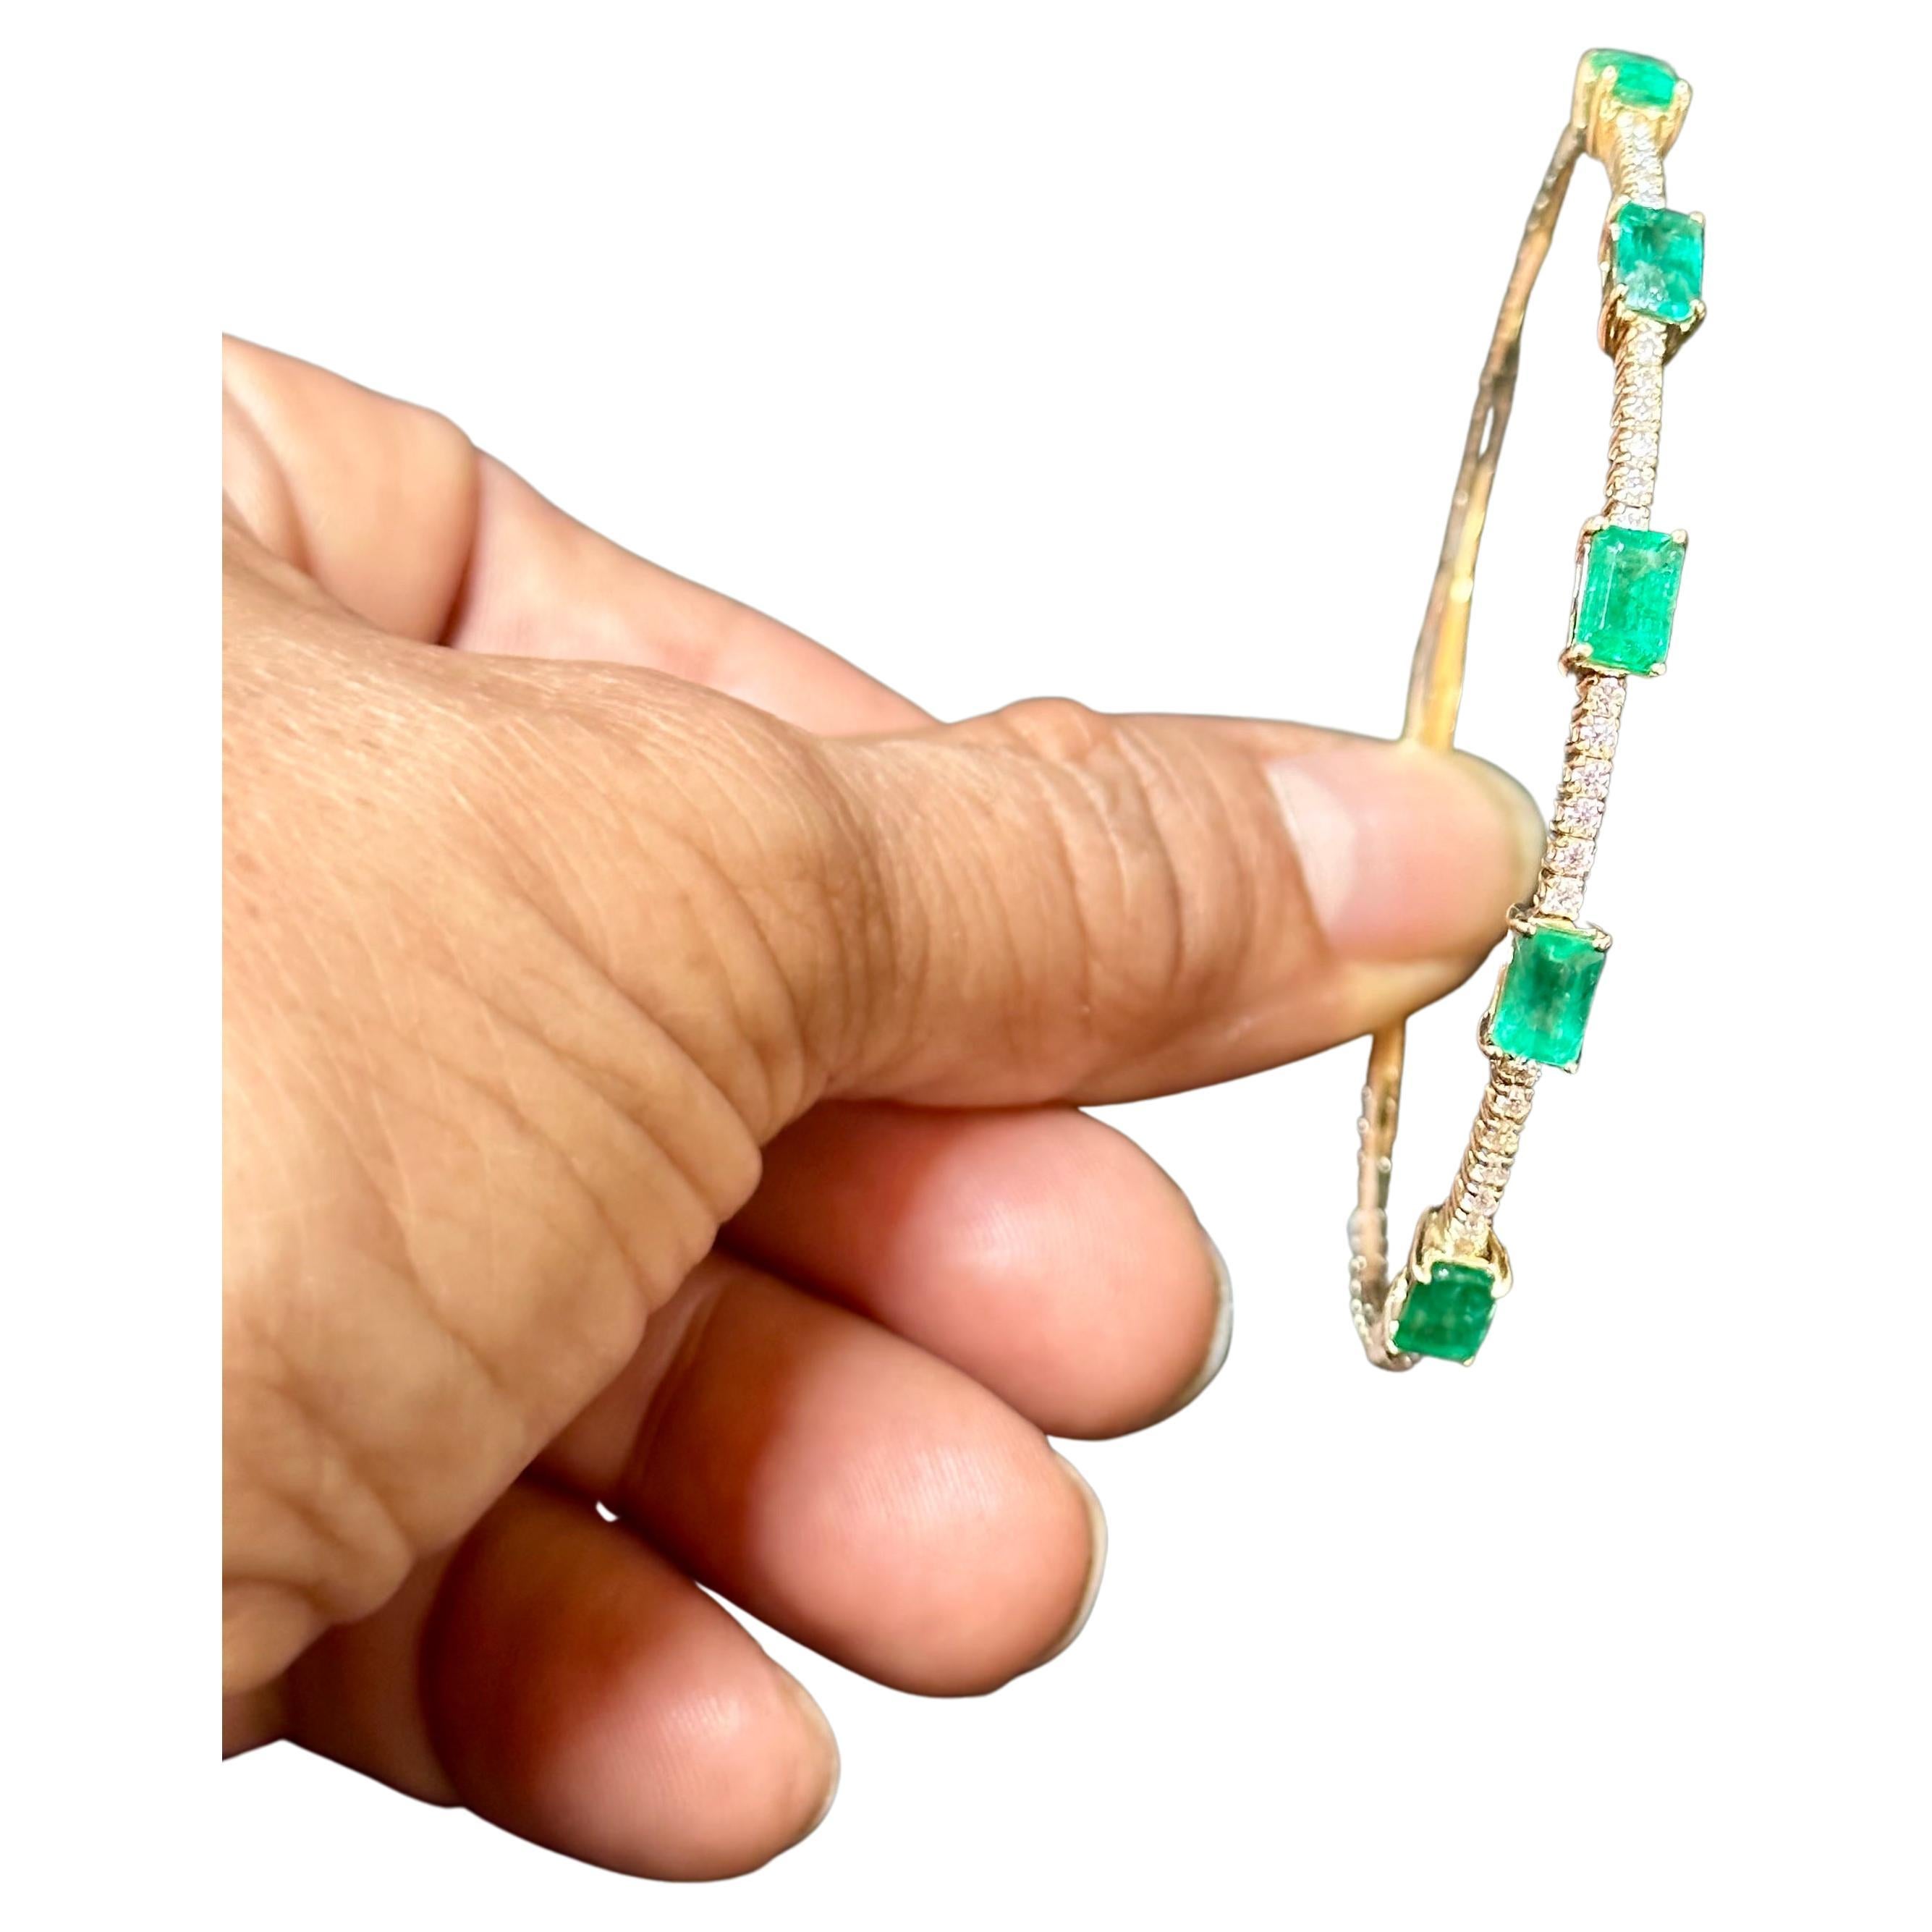 Introducing our exquisite 14 Karat Yellow Gold Bangle Bracelet adorned with approximately 3 carats of Natural Brazilian Emeralds and sparkling diamonds. This bangle bracelet showcases five emerald-cut emeralds, each meticulously separated by a row